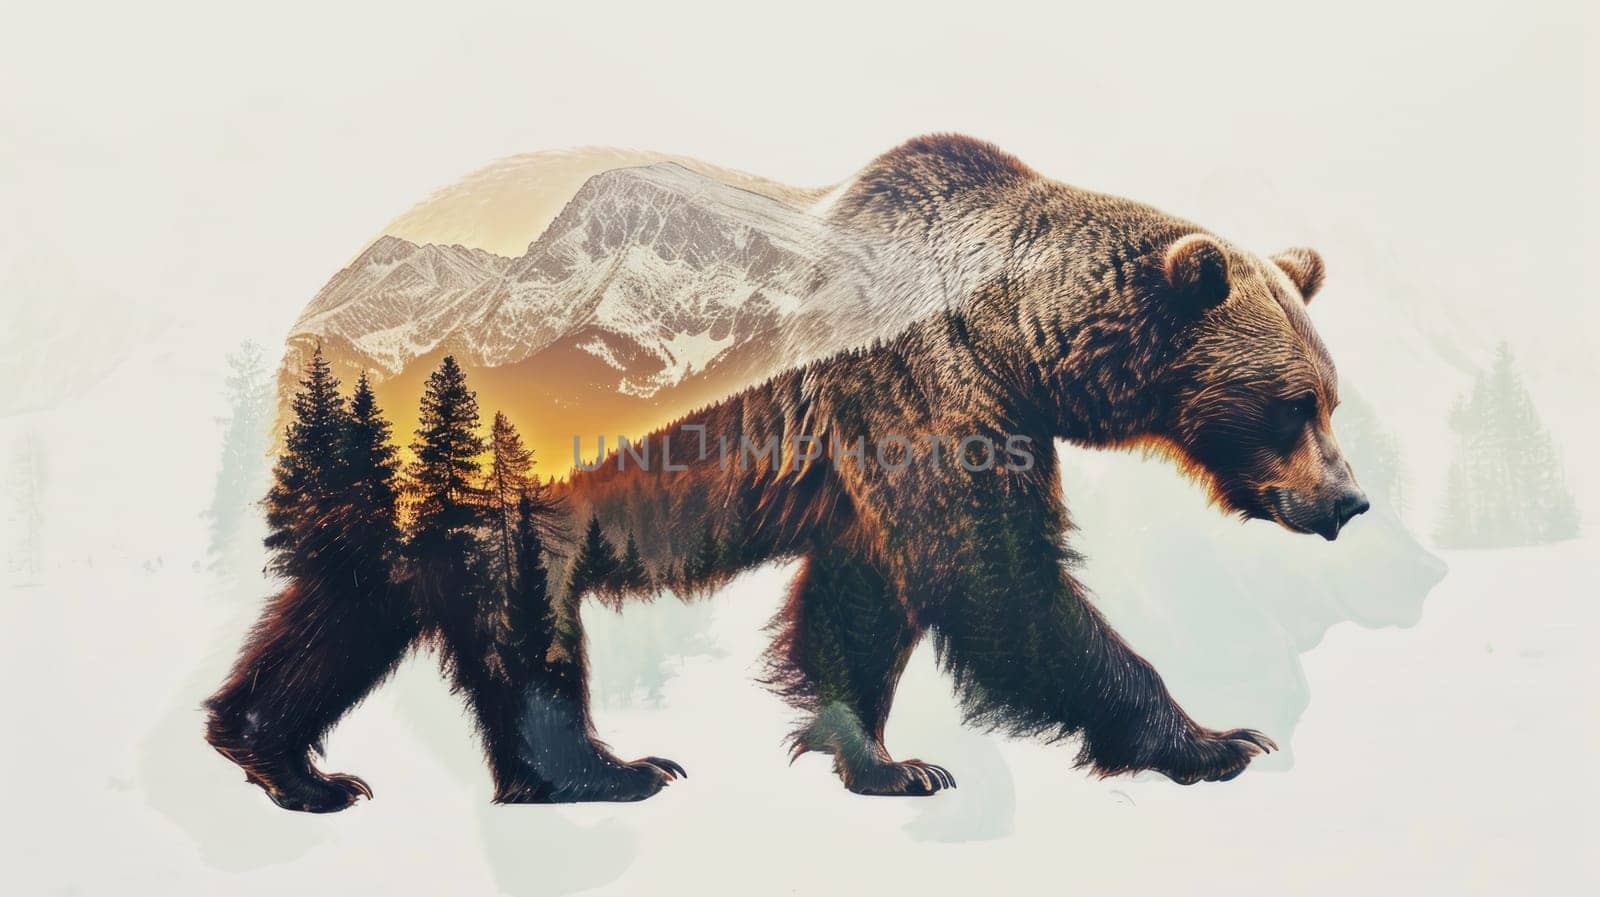 Brown bear in double exposure with taiga forest and mountain scenery.